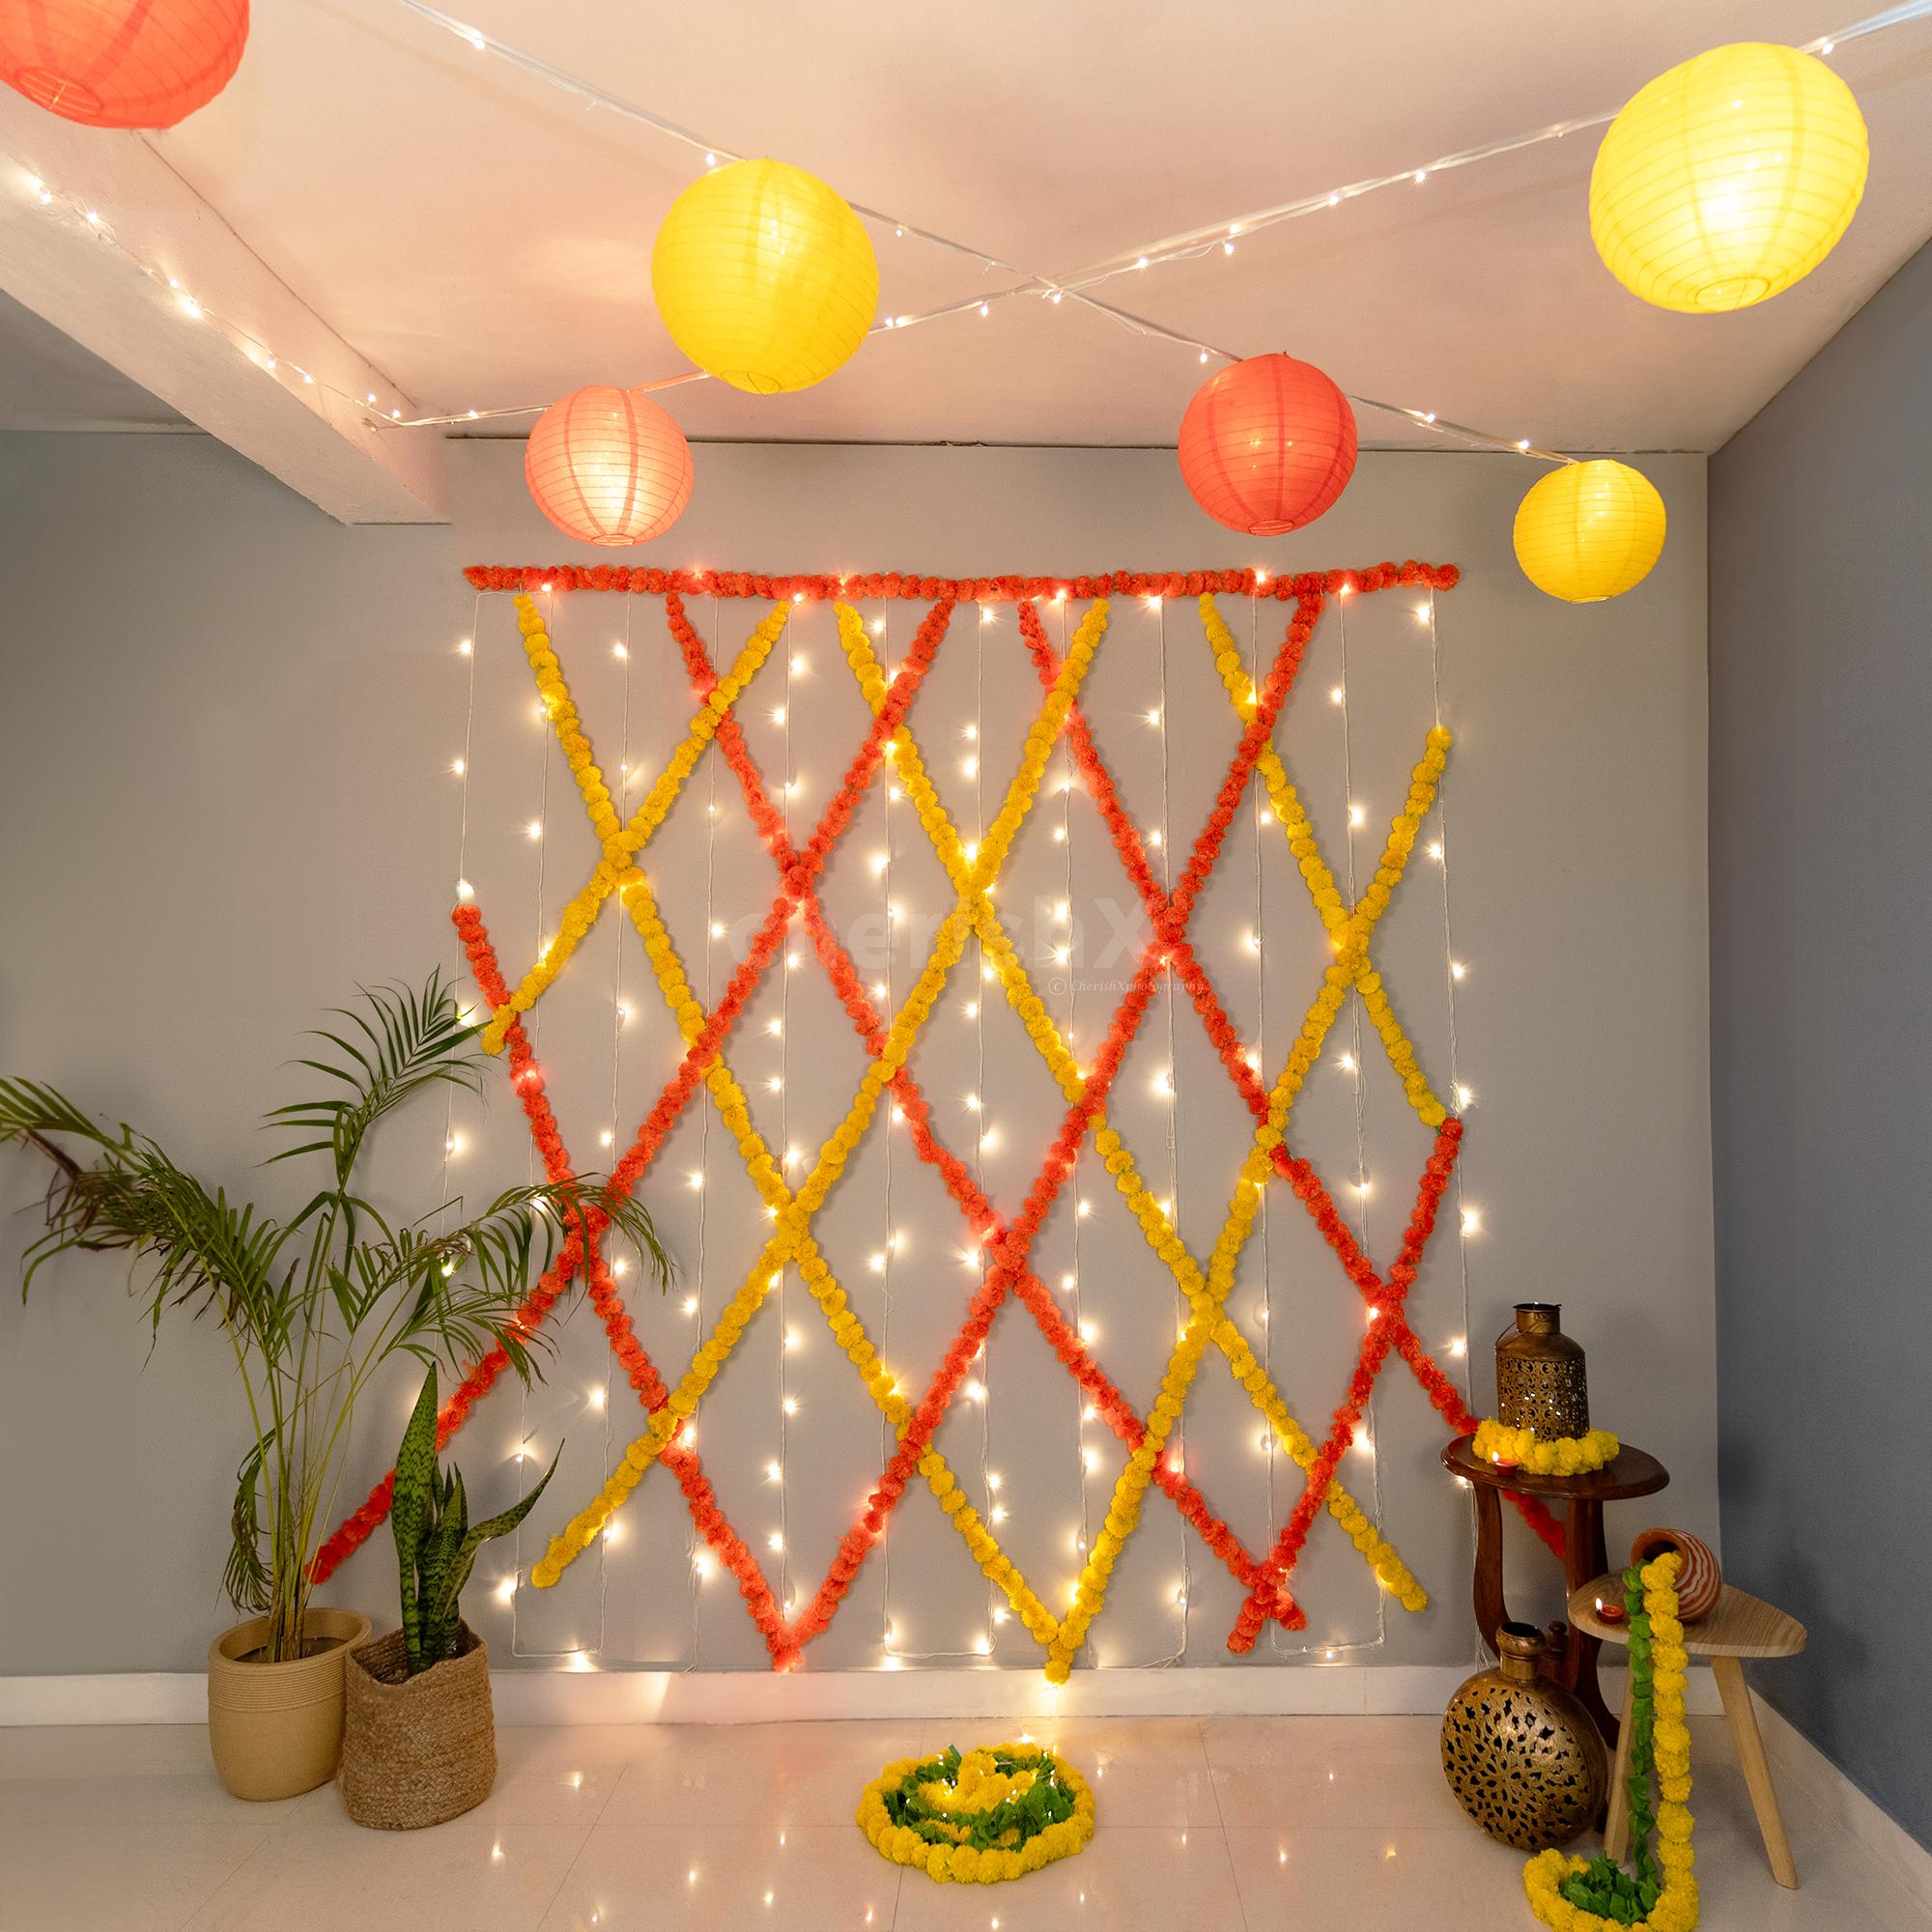 Celebrate Diwali with Festive Flower and Lantern Decoration at home |  Bangalore